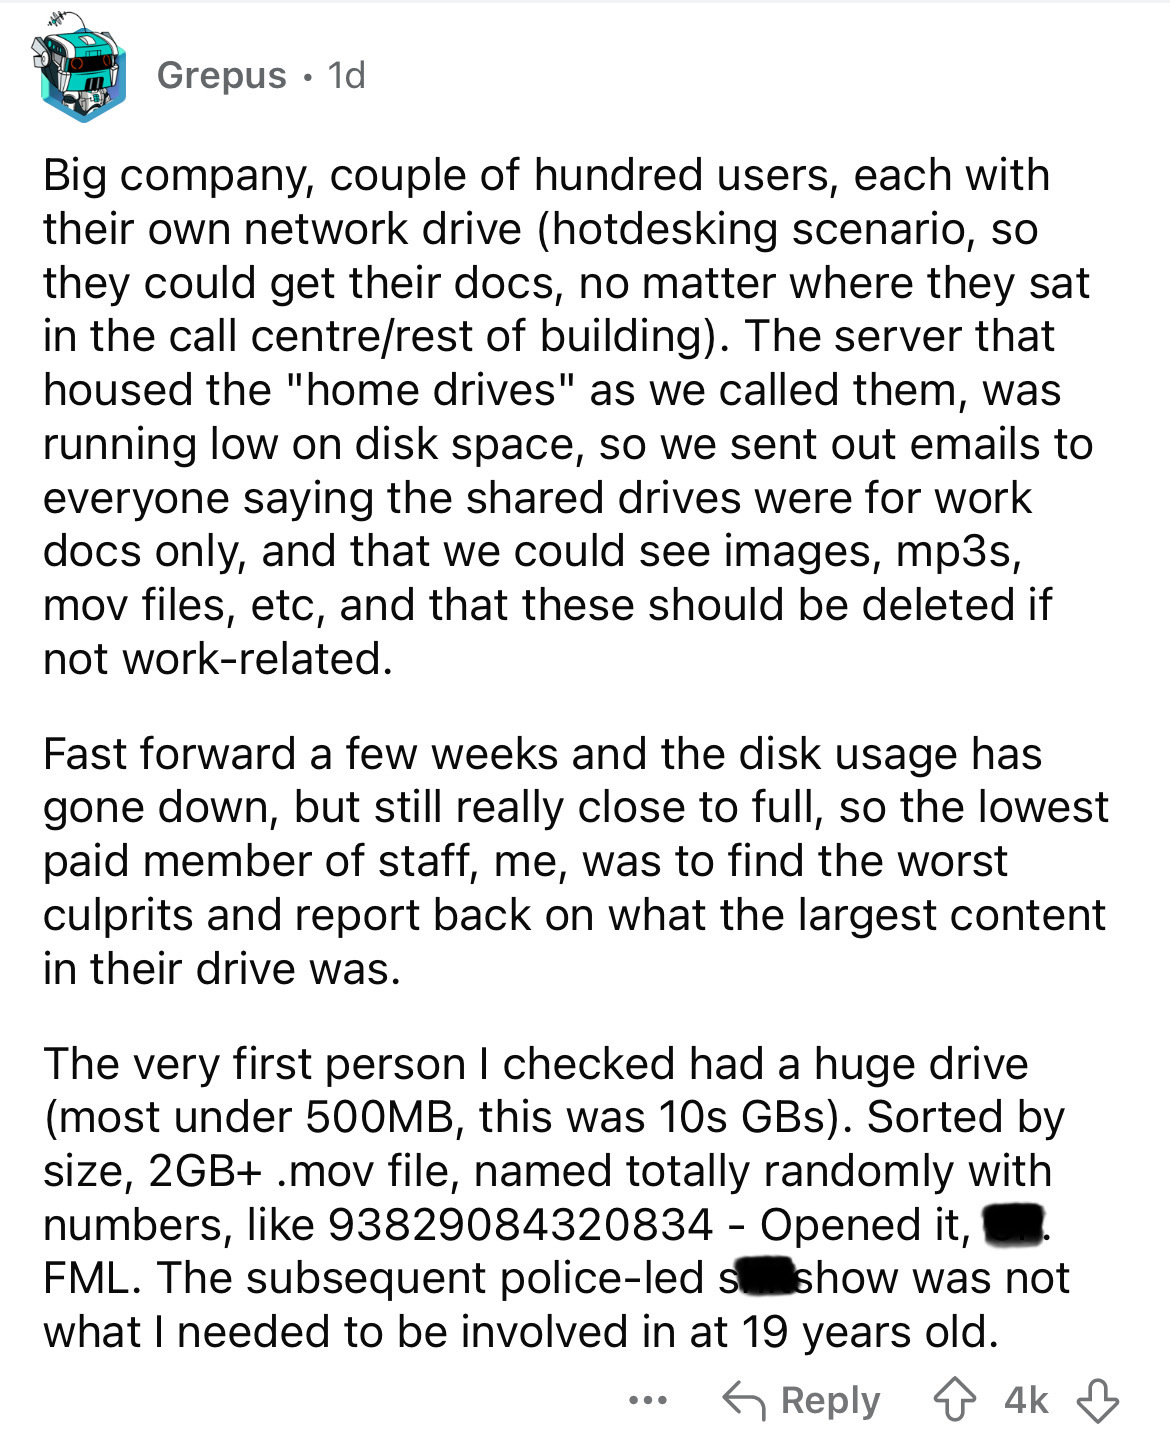 document - Grepus 1d. Big company, couple of hundred users, each with their own network drive hotdesking scenario, so they could get their docs, no matter where they sat in the call centrerest of building. The server that housed the "home drives" as we ca